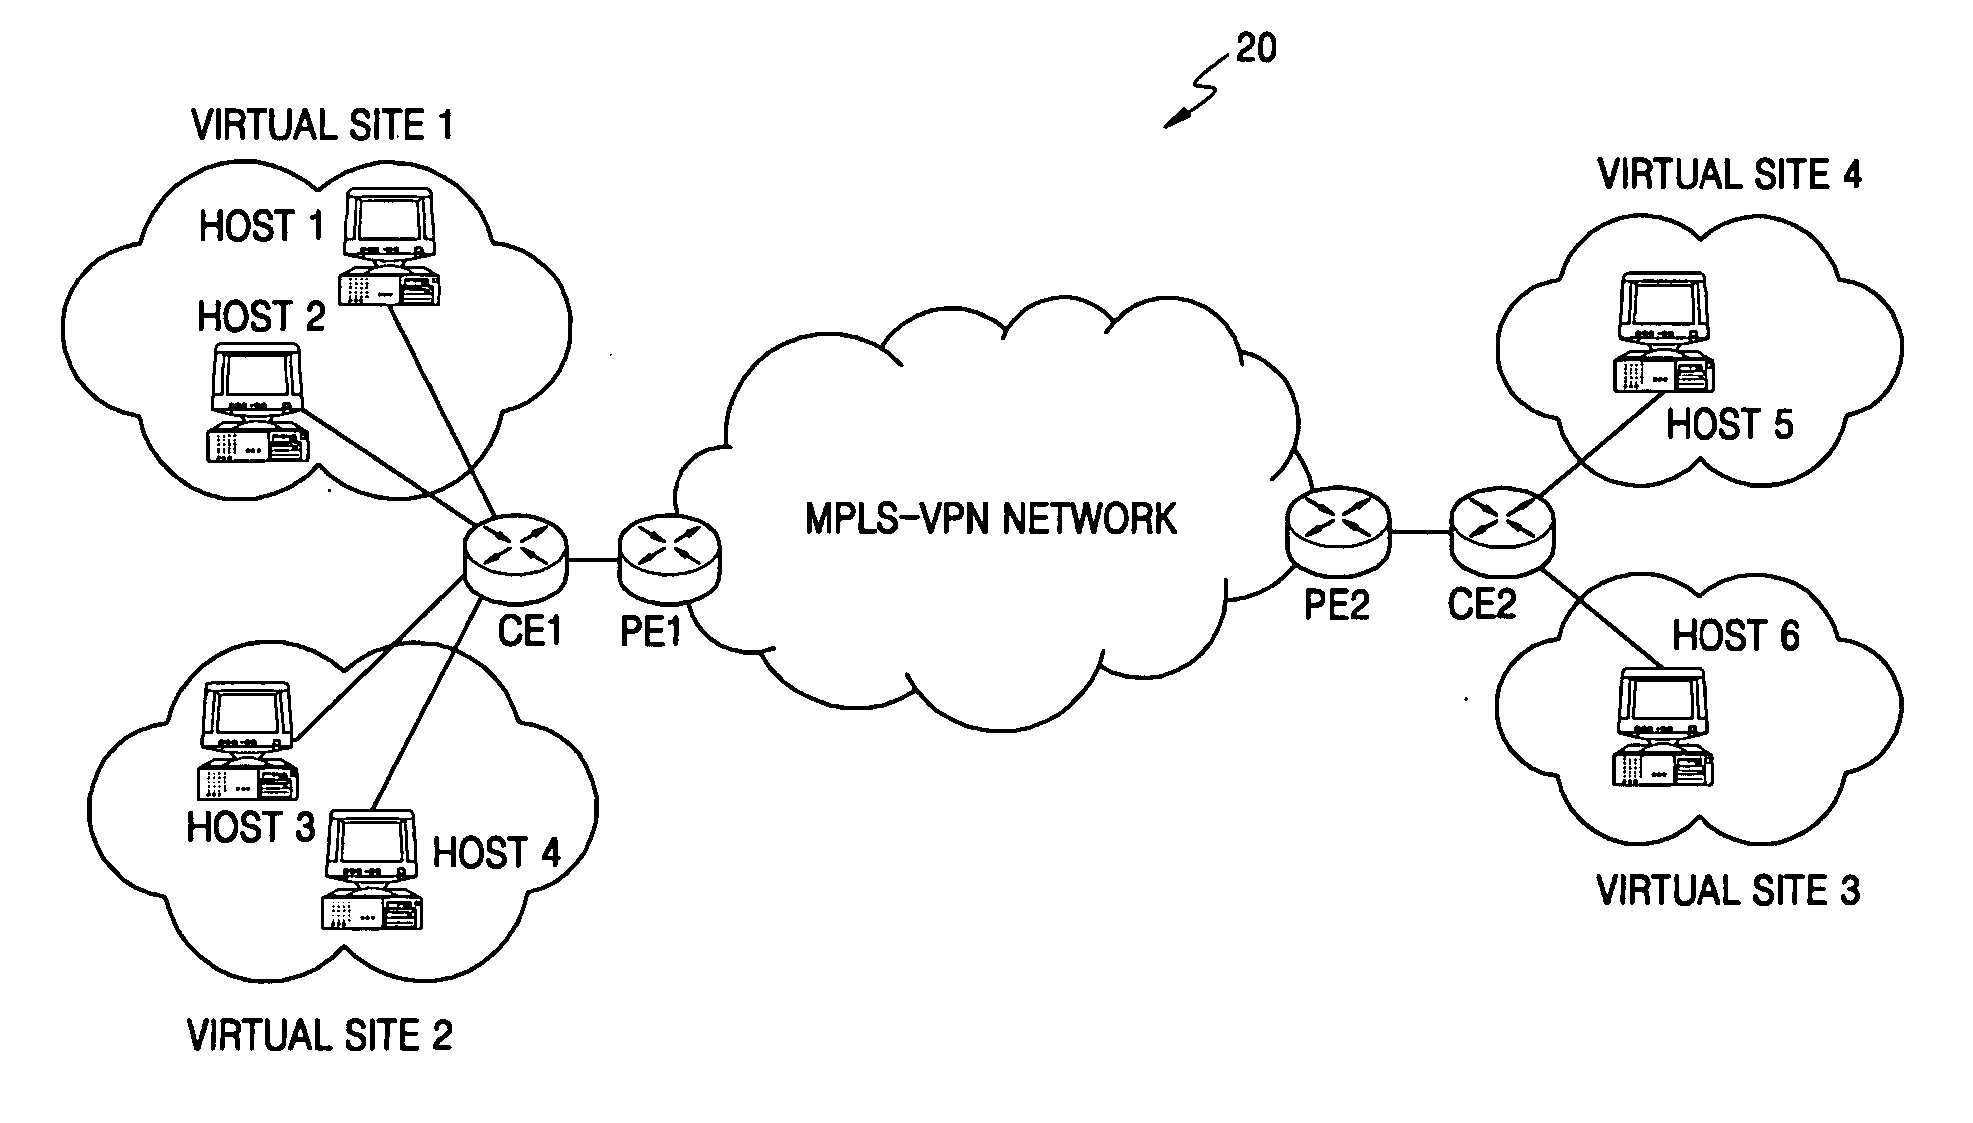 Apparatus and method of designating virtual sites using policy informations in multiprotocol label switching networks